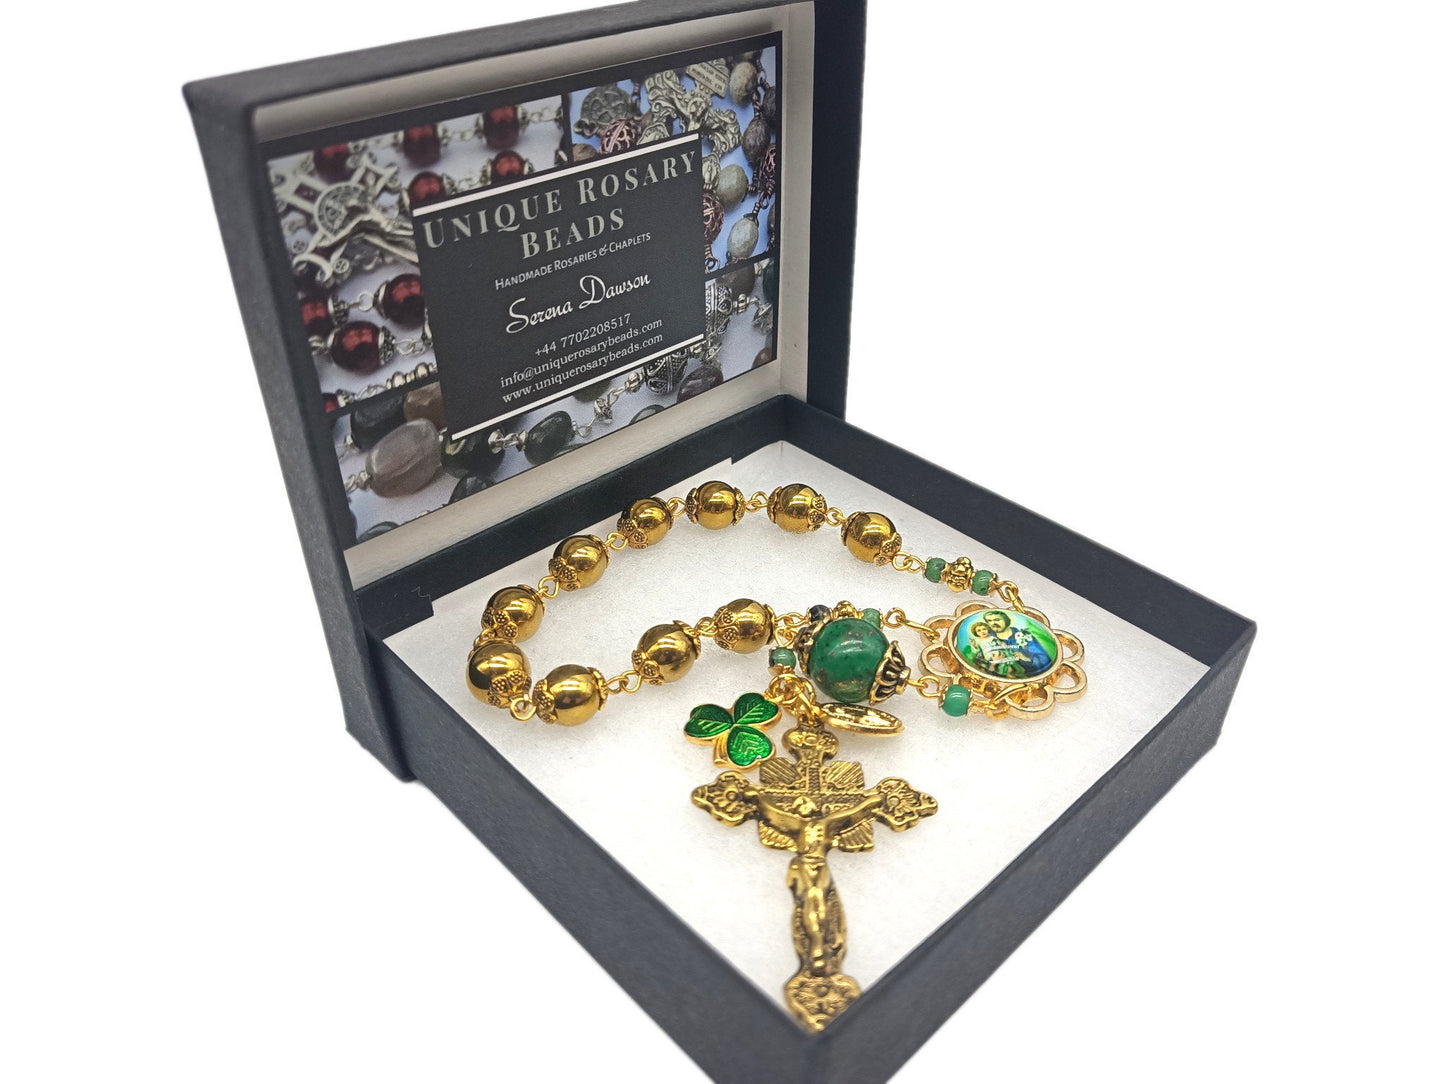 Saint Joseph unique rosary beads single decade with gold hematite and gemstone beads, crucifix and St. Joseph picture centre medal.